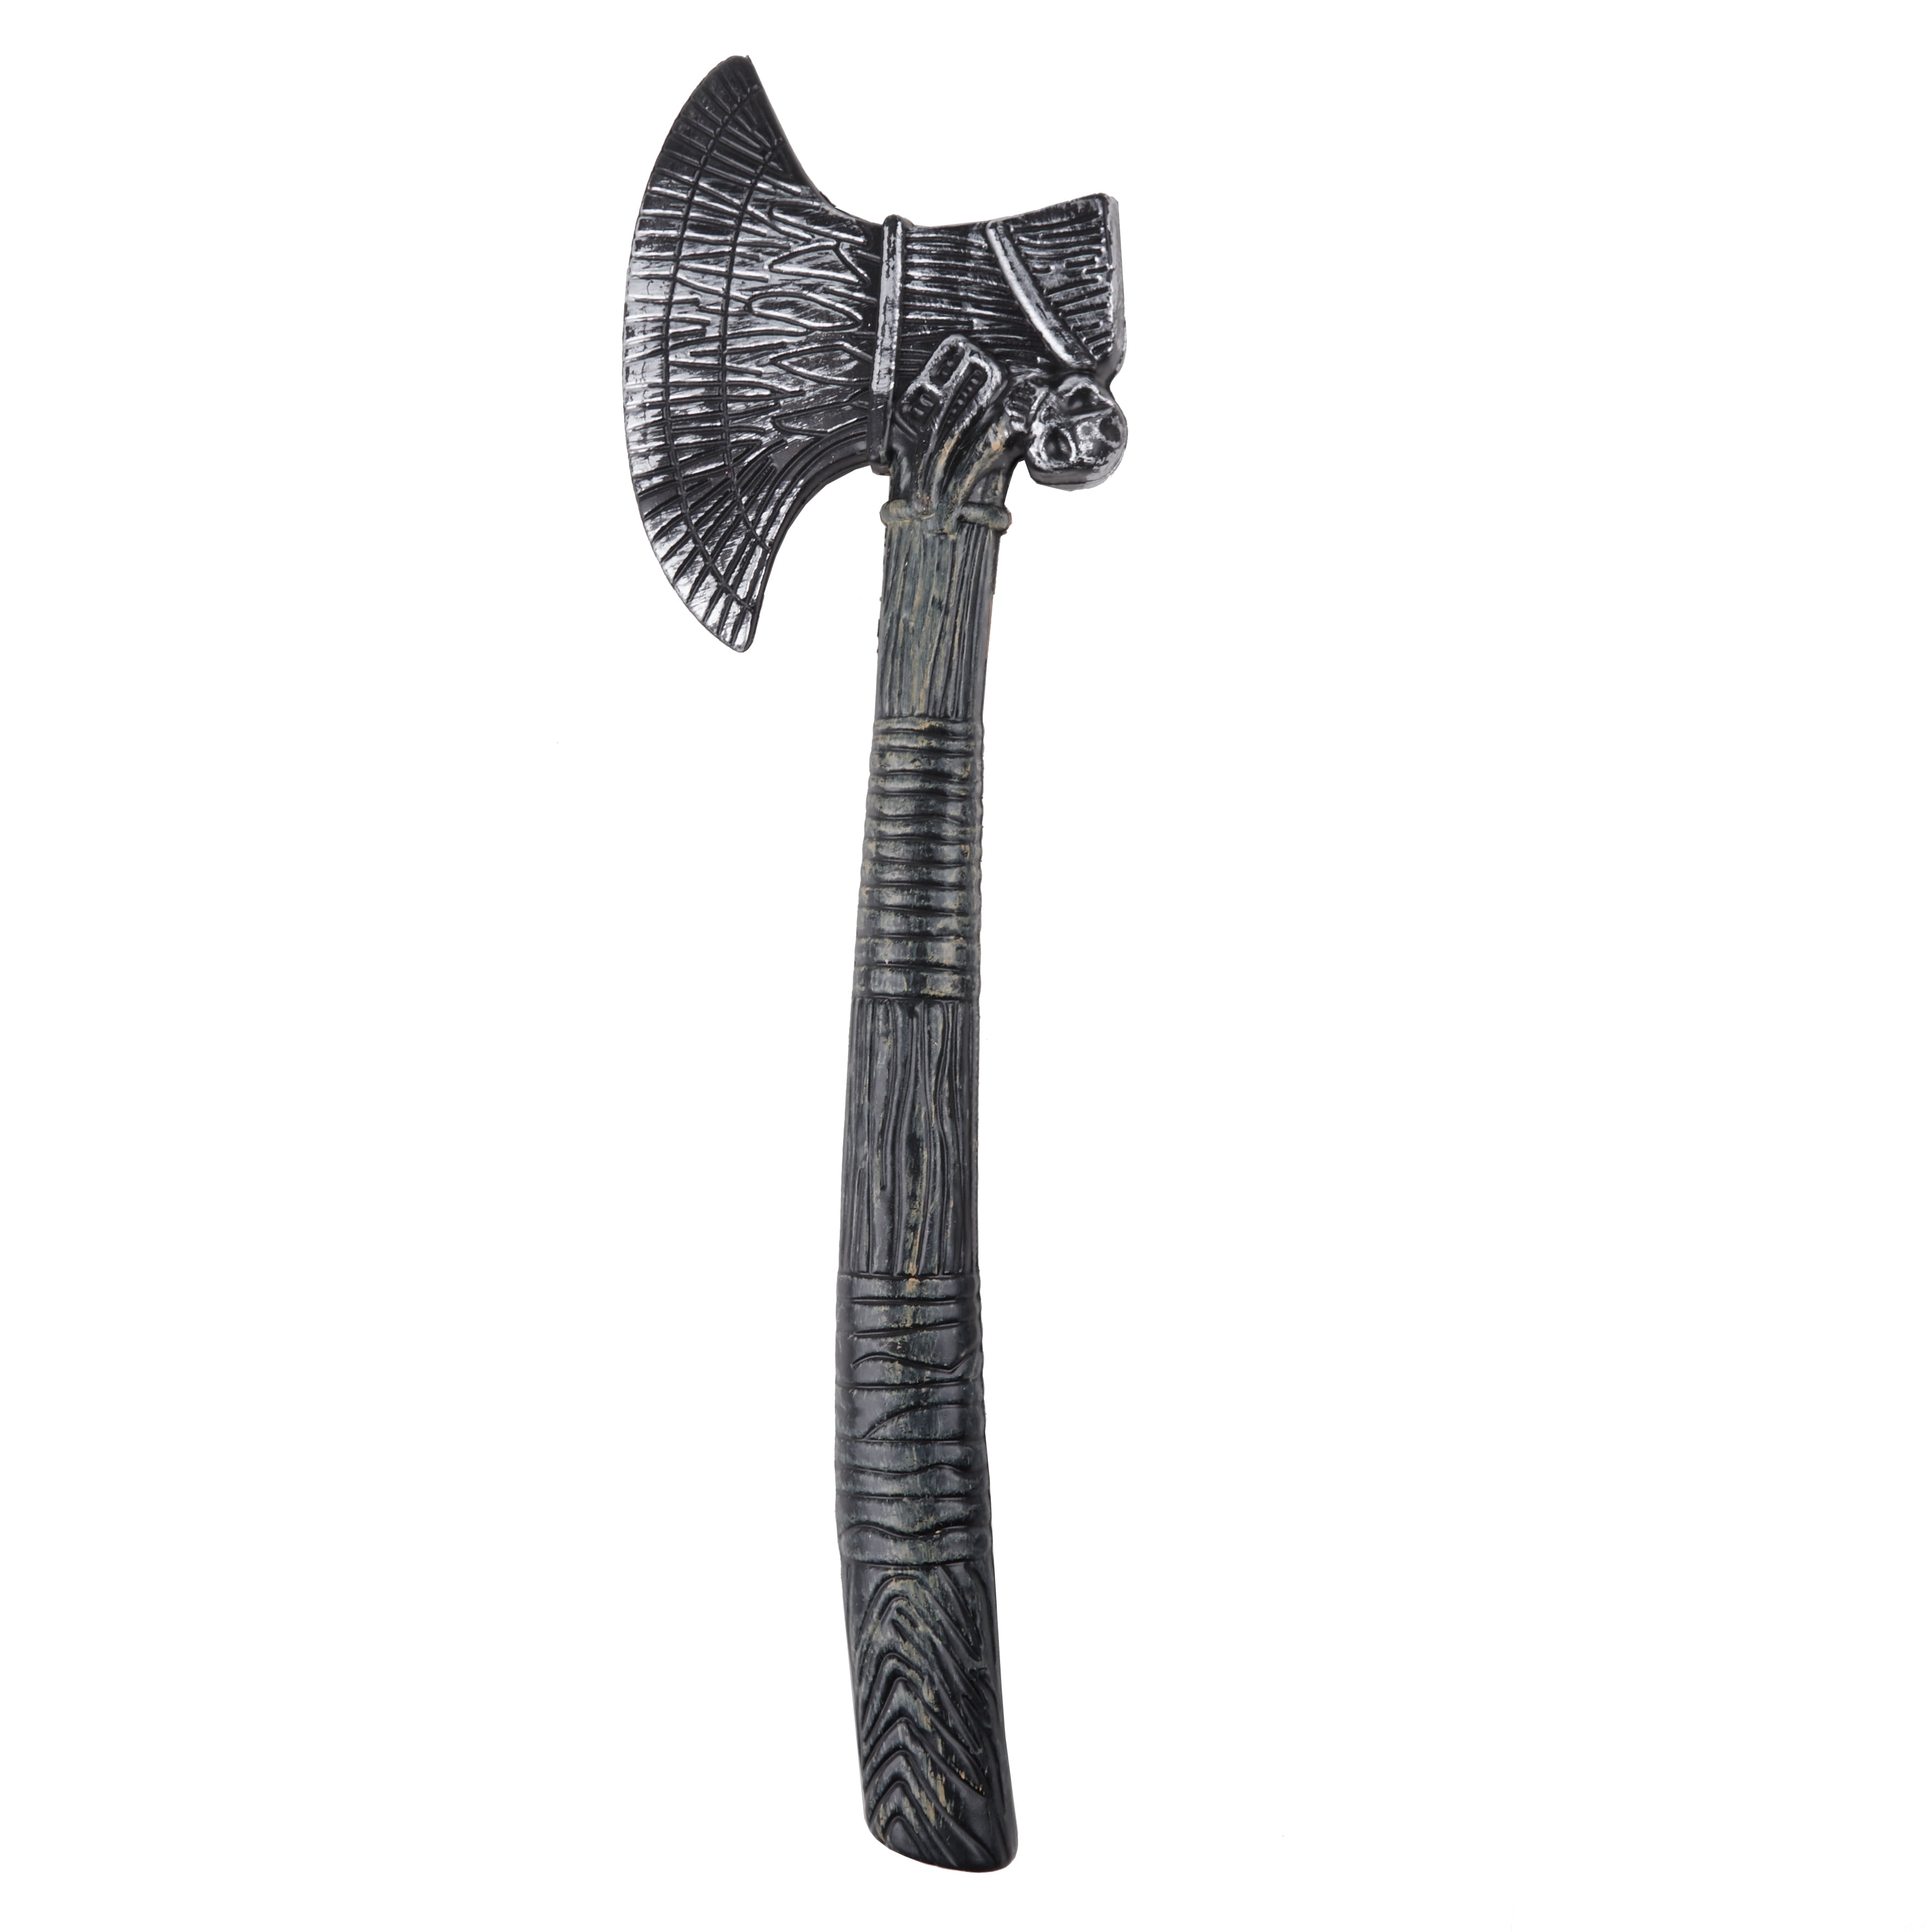 Way to Celebrate!  Halloween  Male Silver Toy Axe Costume Weapon for Children, 1 Piece